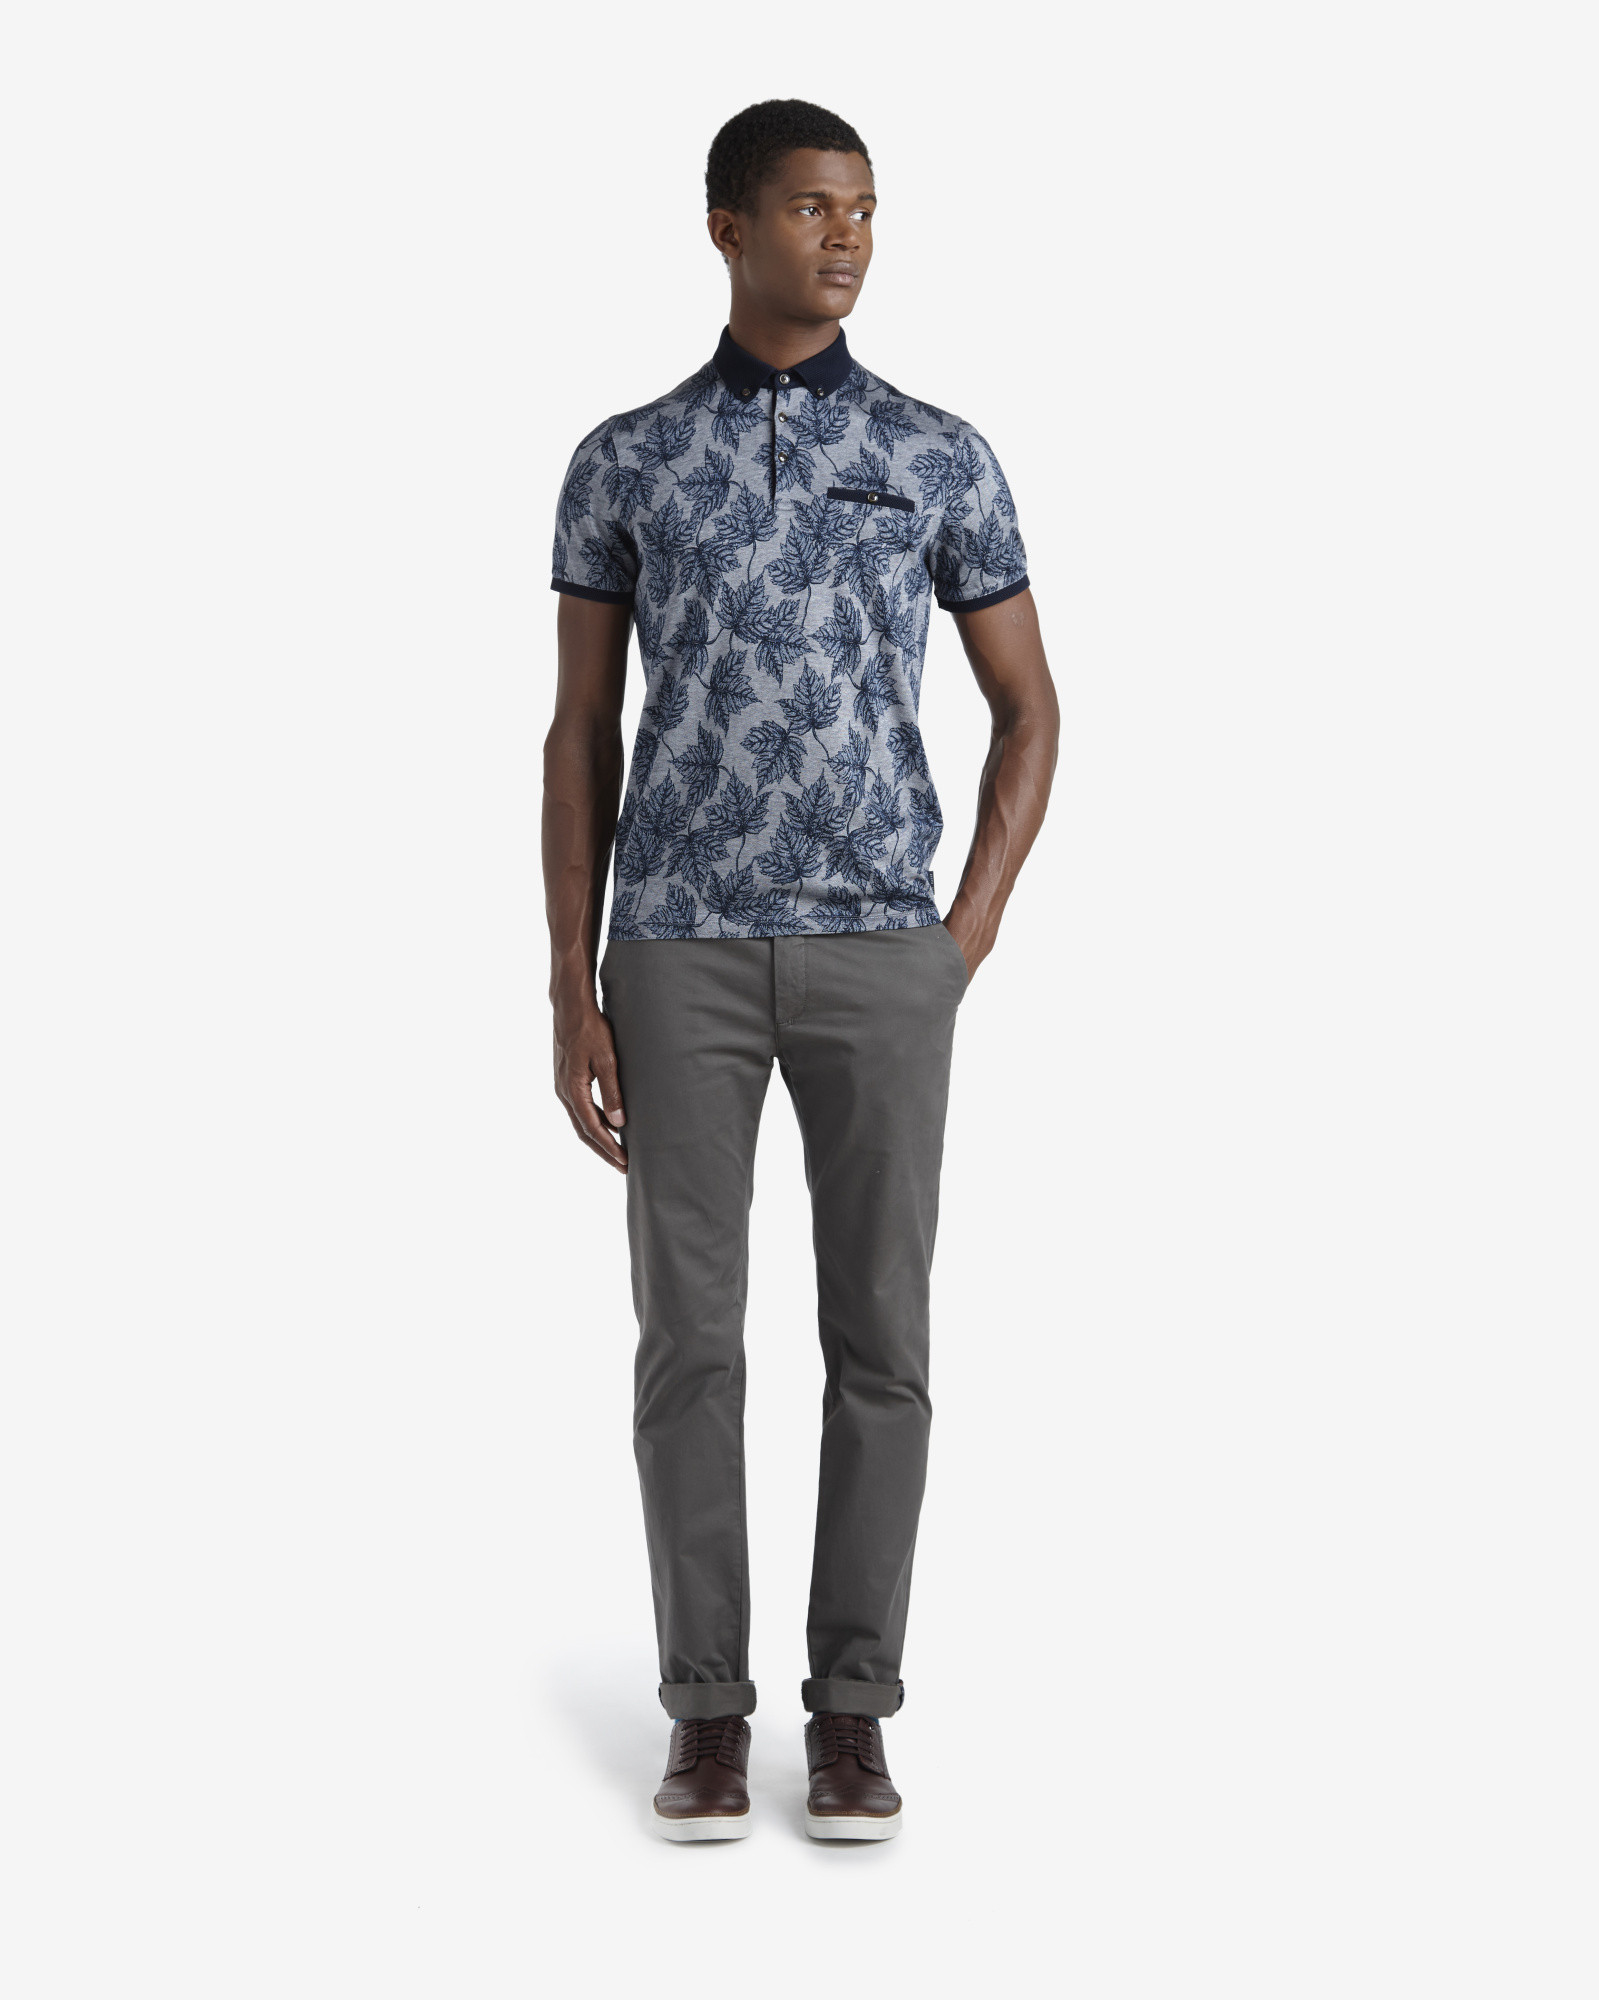 Lyst - Ted Baker Leaf Print Polo Shirt in Blue for Men